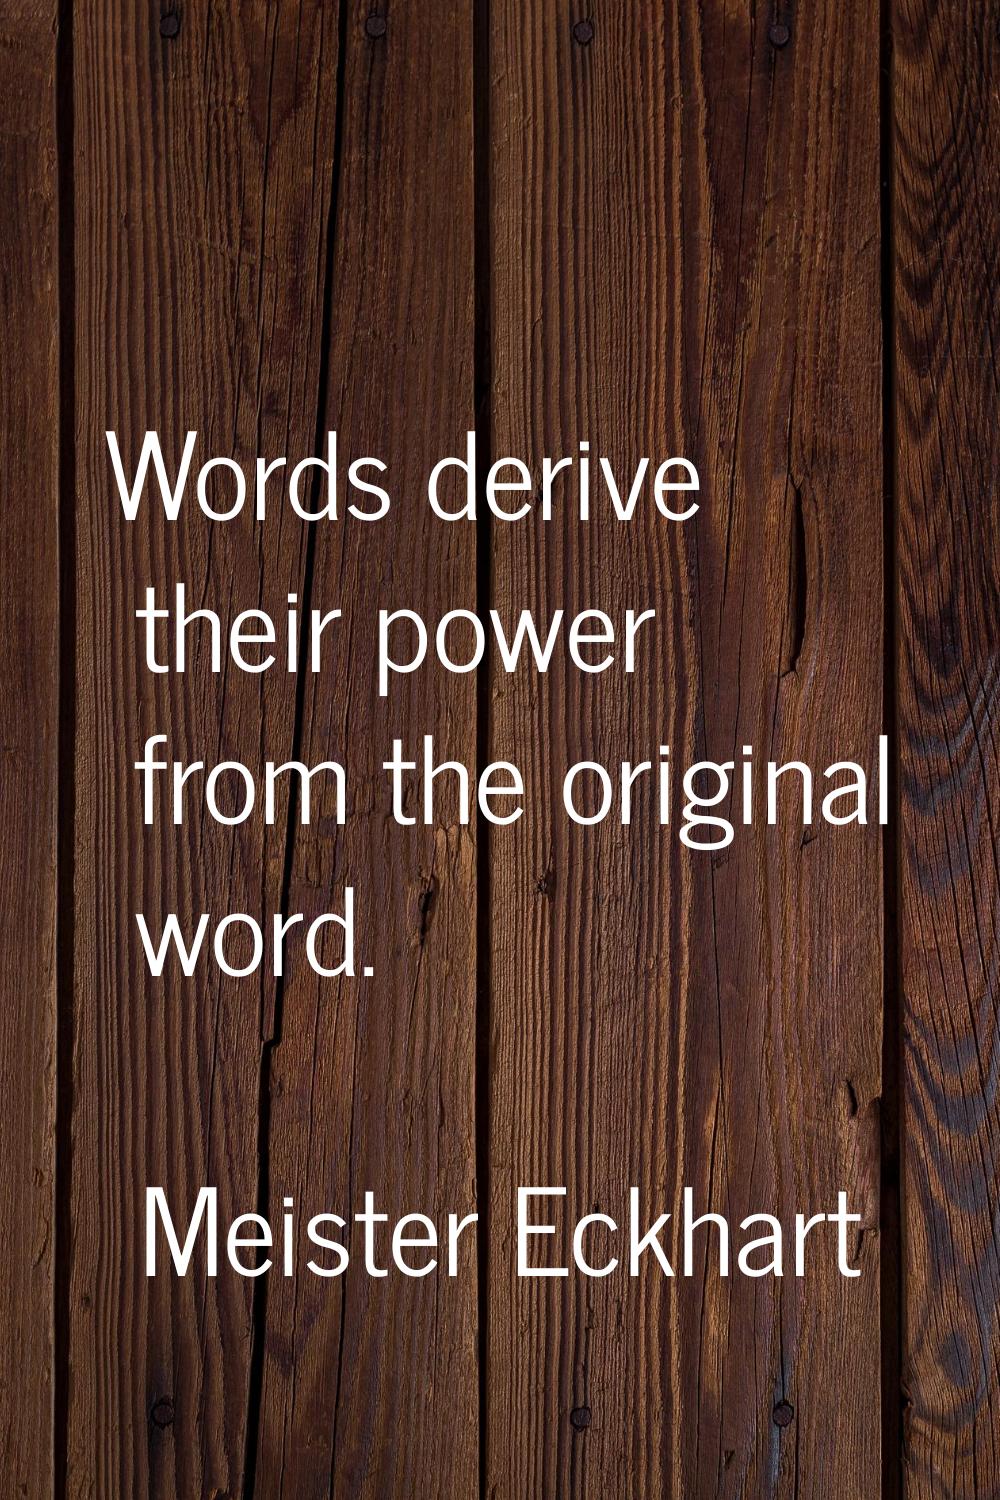 Words derive their power from the original word.